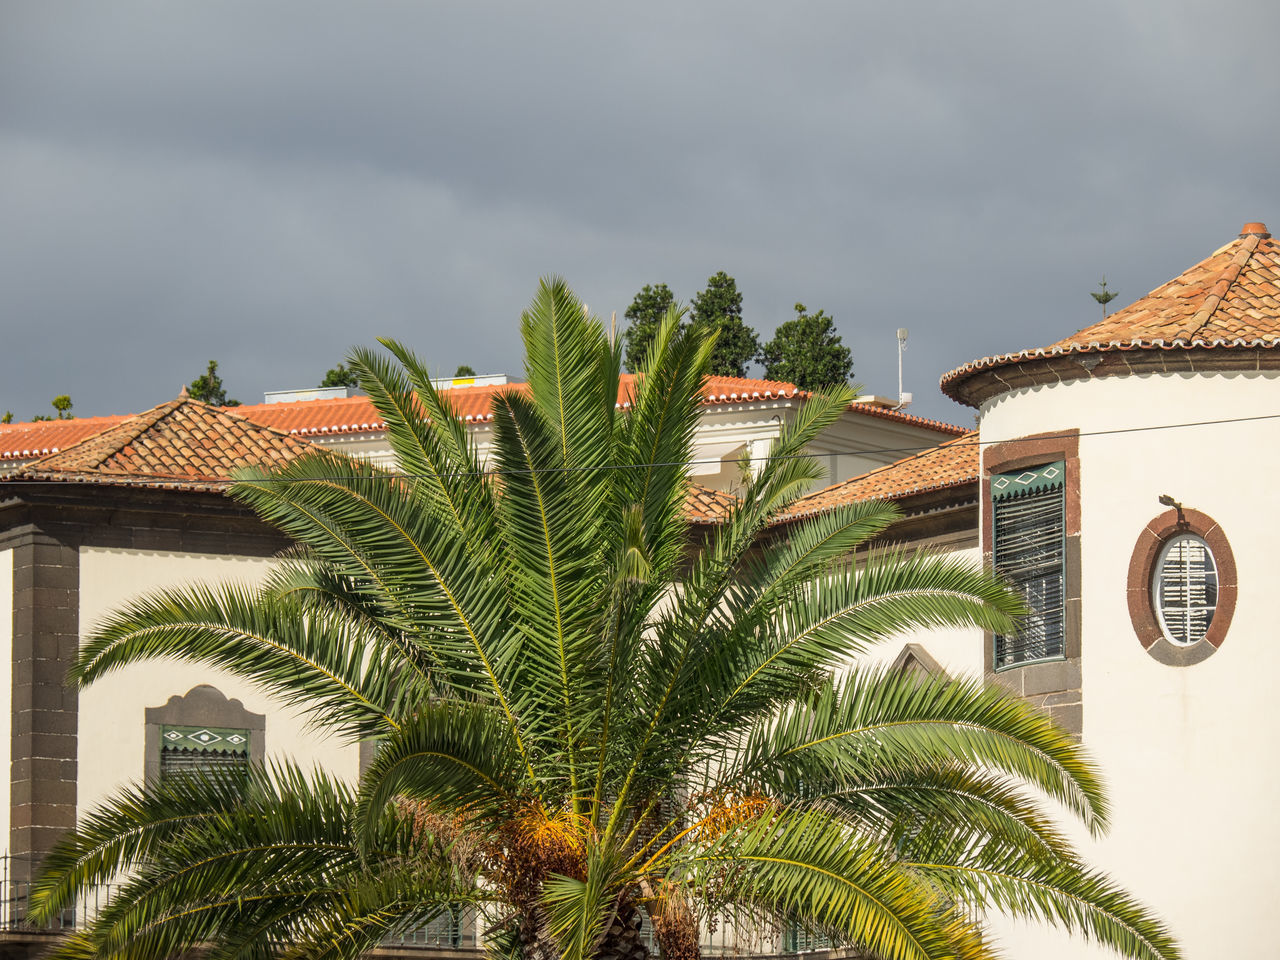 PALM TREES AND PLANTS OUTSIDE HOUSE